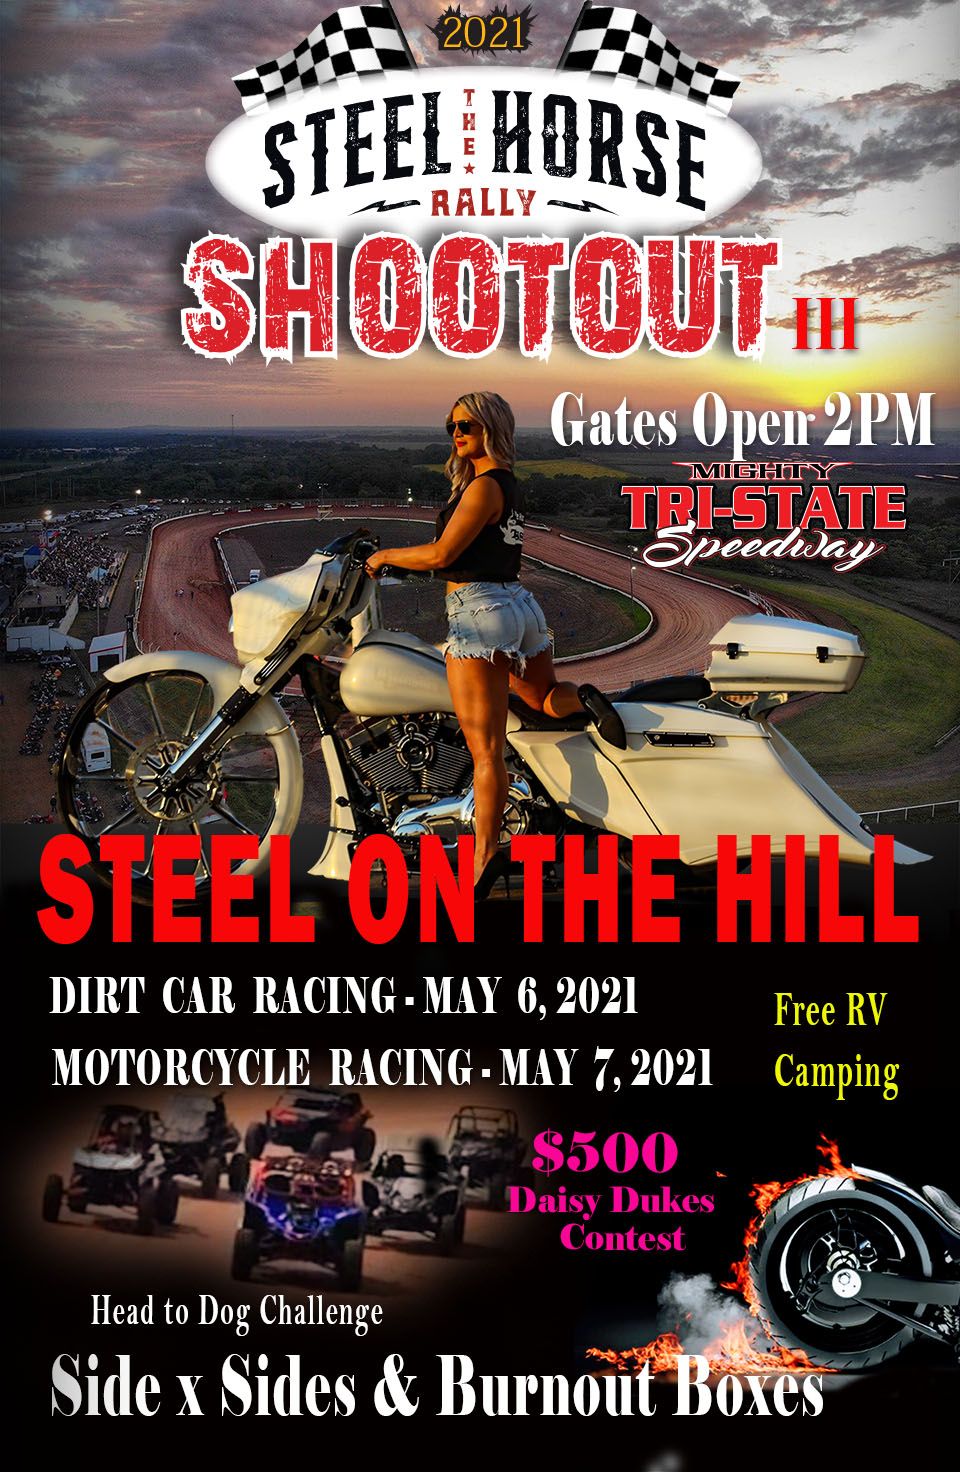 The Steel Horse Shootout III TriState Speedway